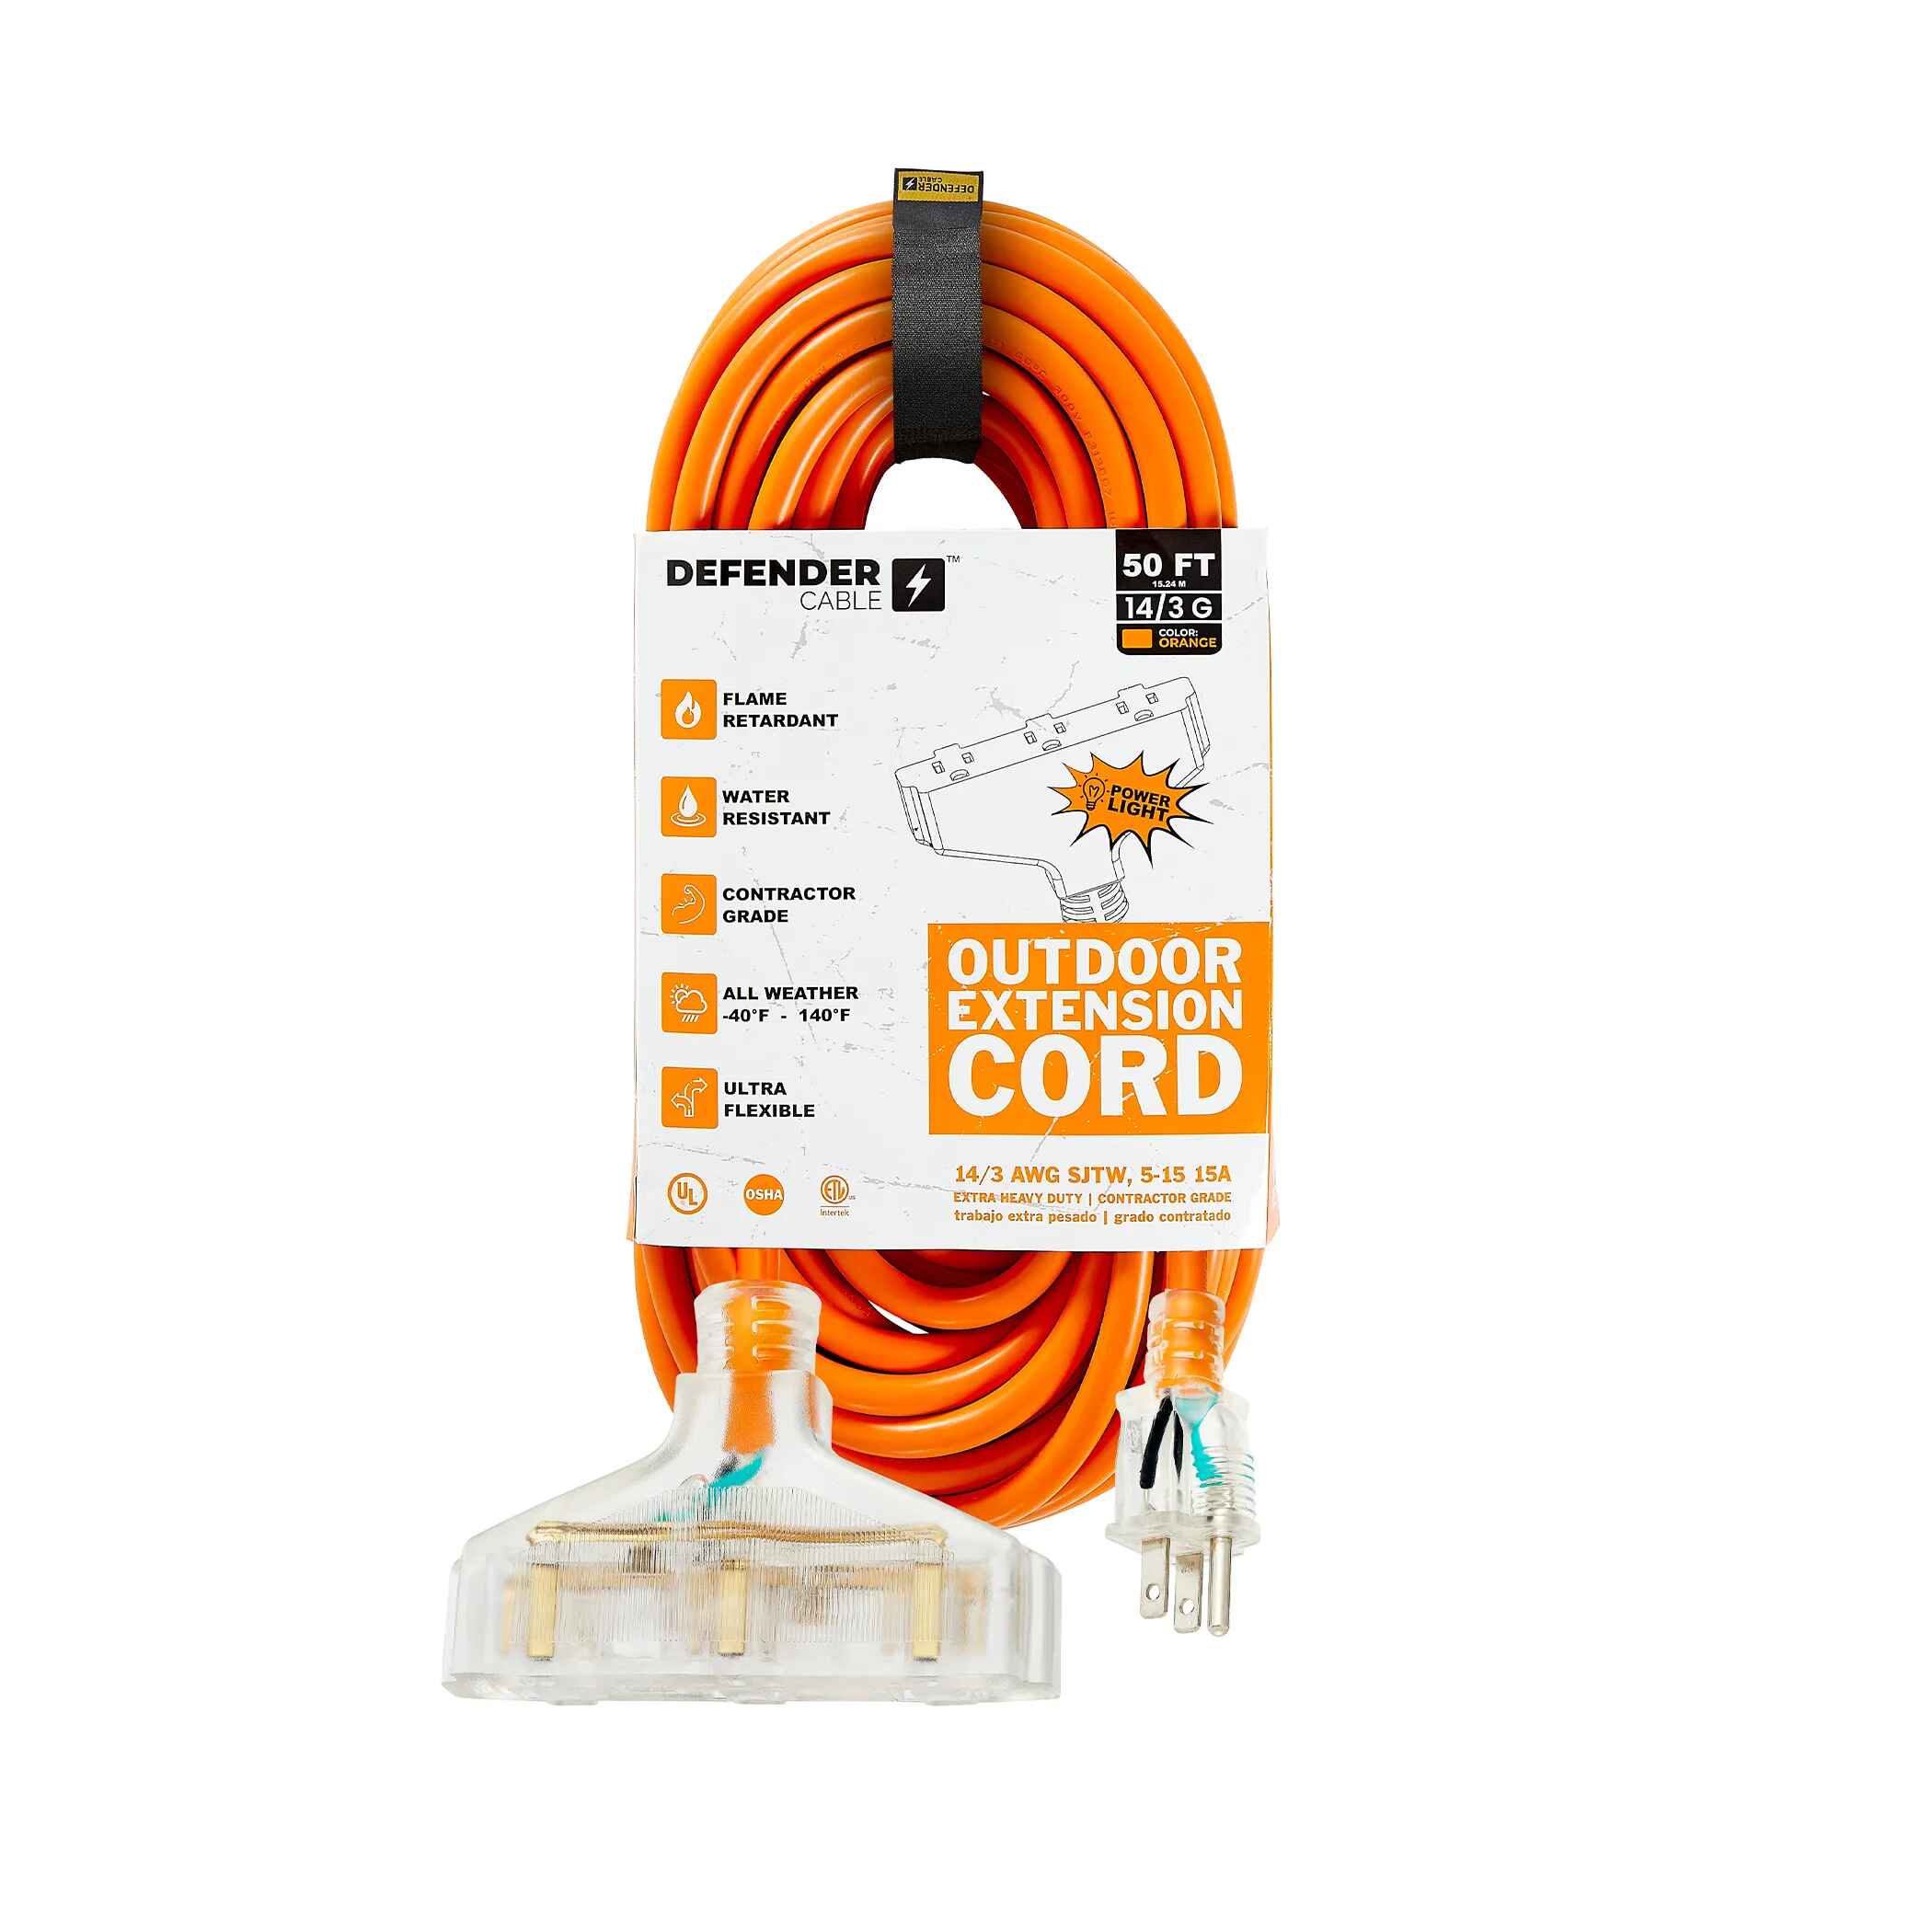 Defender Cable 14/3 Gauge, 50 ft Triple Outlet SJTW Contractor Grade Extension Cord, with Lighted end,UL/ETL Listed, All Purpose (Osha Compliant)